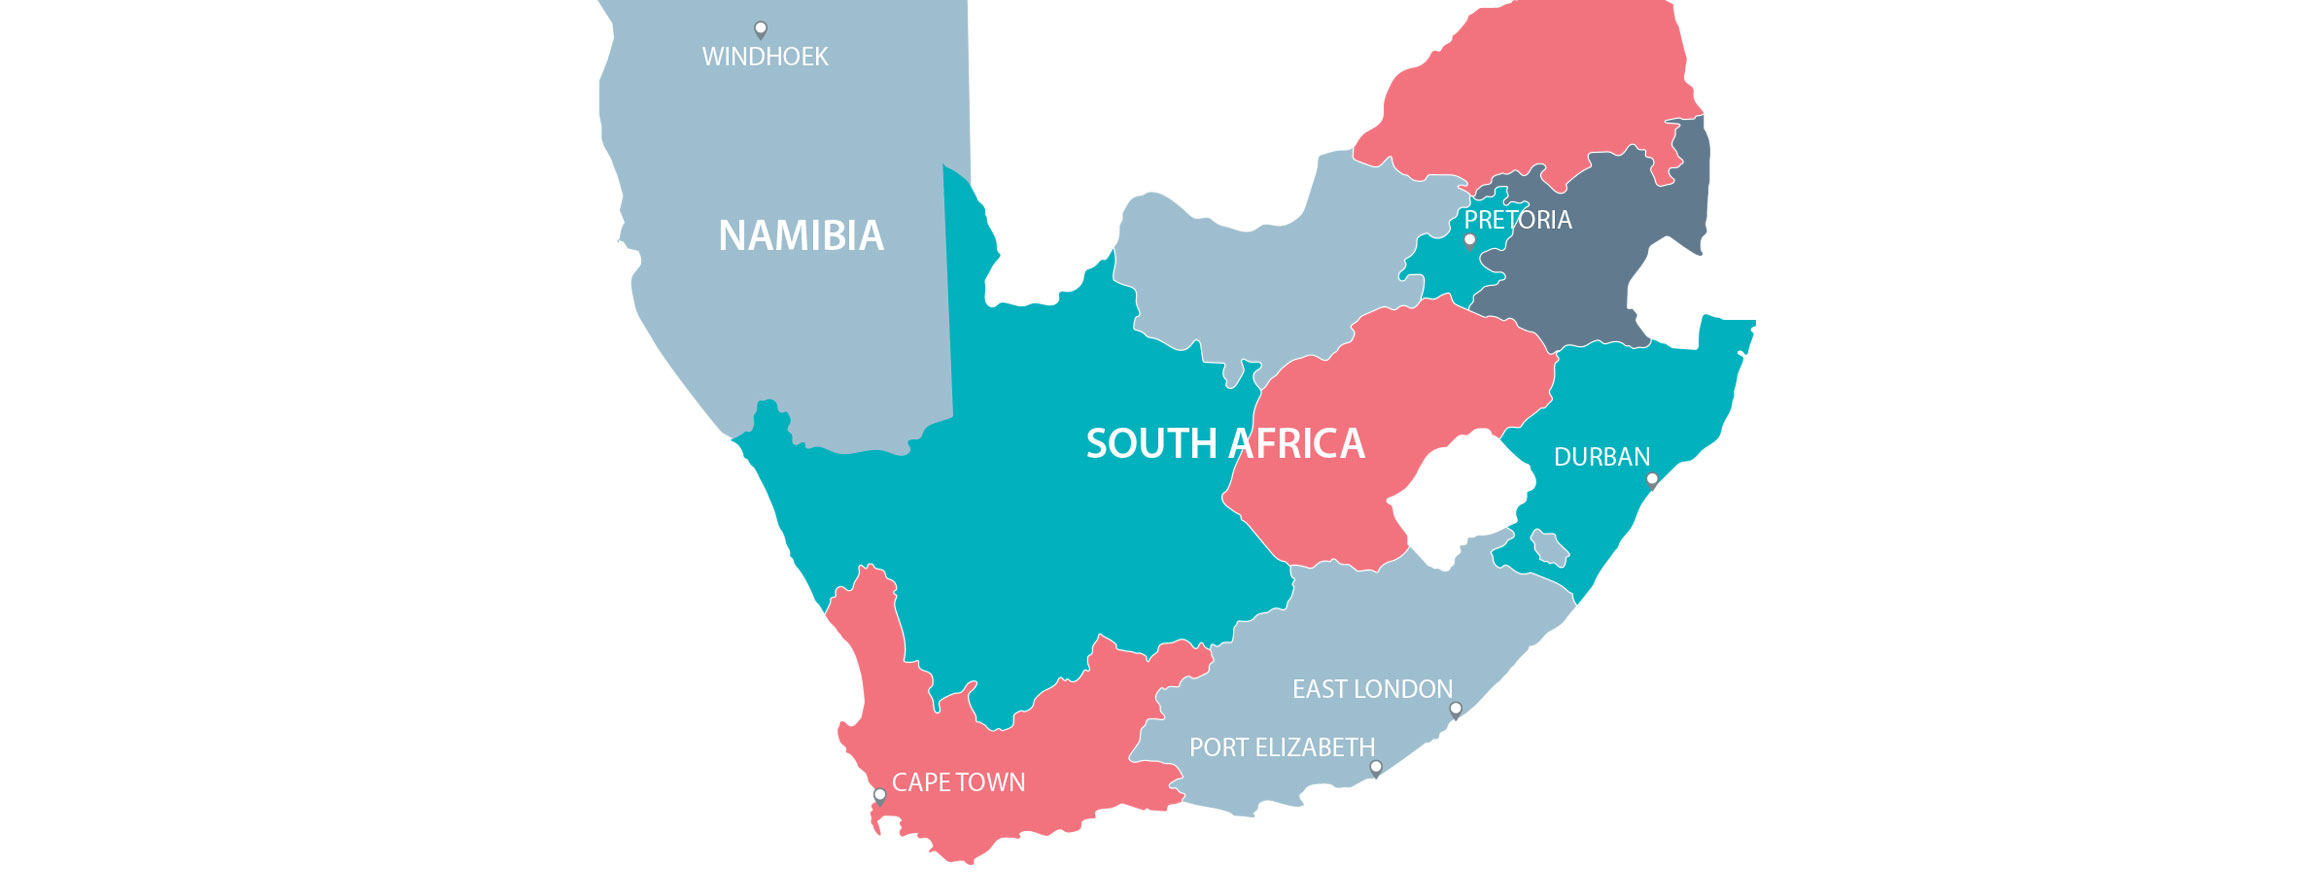 Workshops in South Africa and Namibia